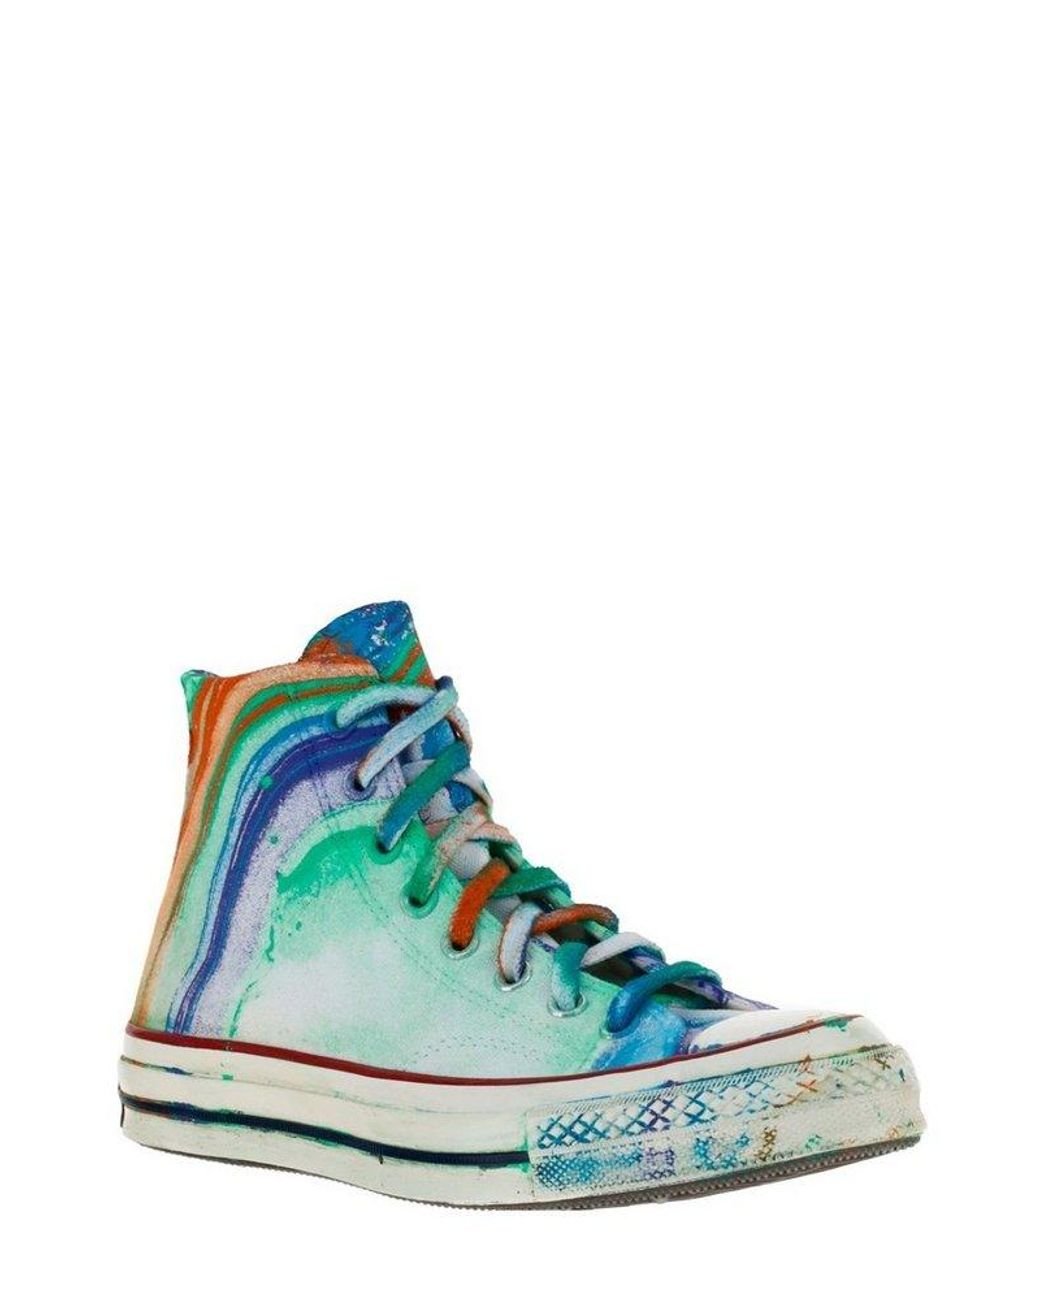 Converse Canvas Hydro Dip-dyed Chuck 70 Sneakers in Blue for Men - Save 4%  | Lyst